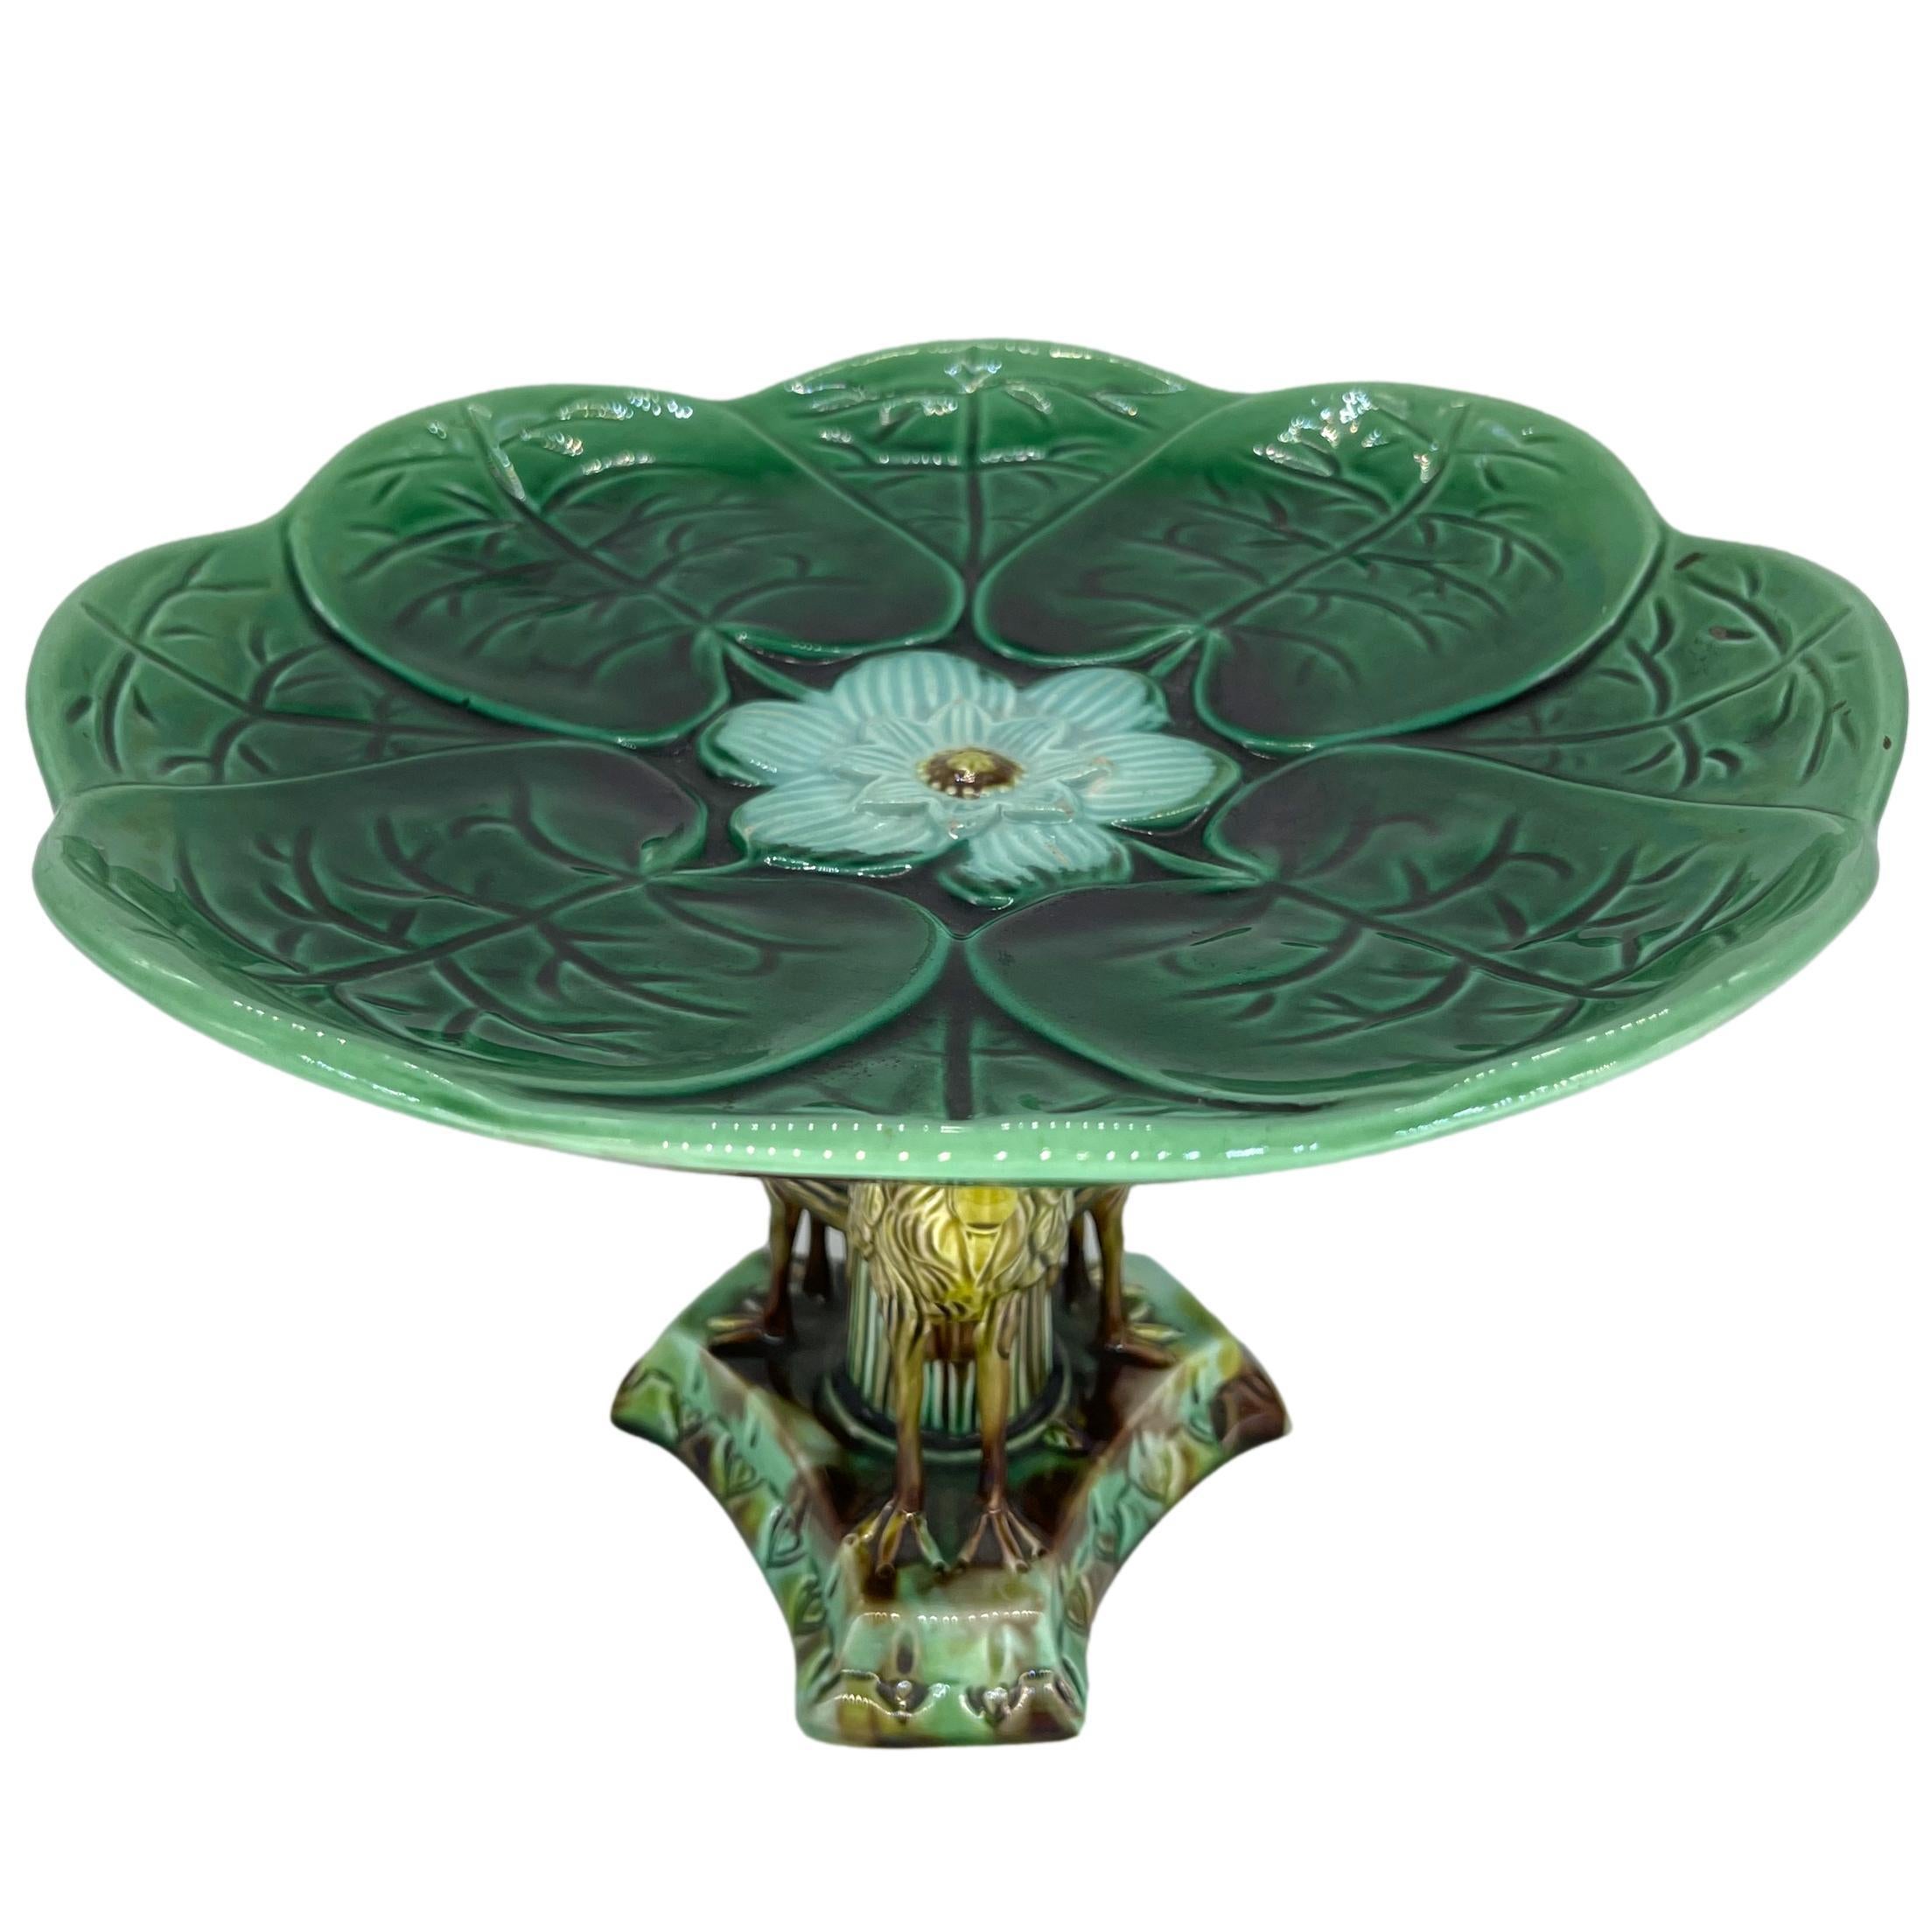 Adams & Bromley Majolica Comport Design Number 1, the dish formed by green-glazed lily pads with a central relief molded blossom, supported by a stalk-form column with three applied herons, on a raised plinth pedestal base, English, ca. 1880. 
For